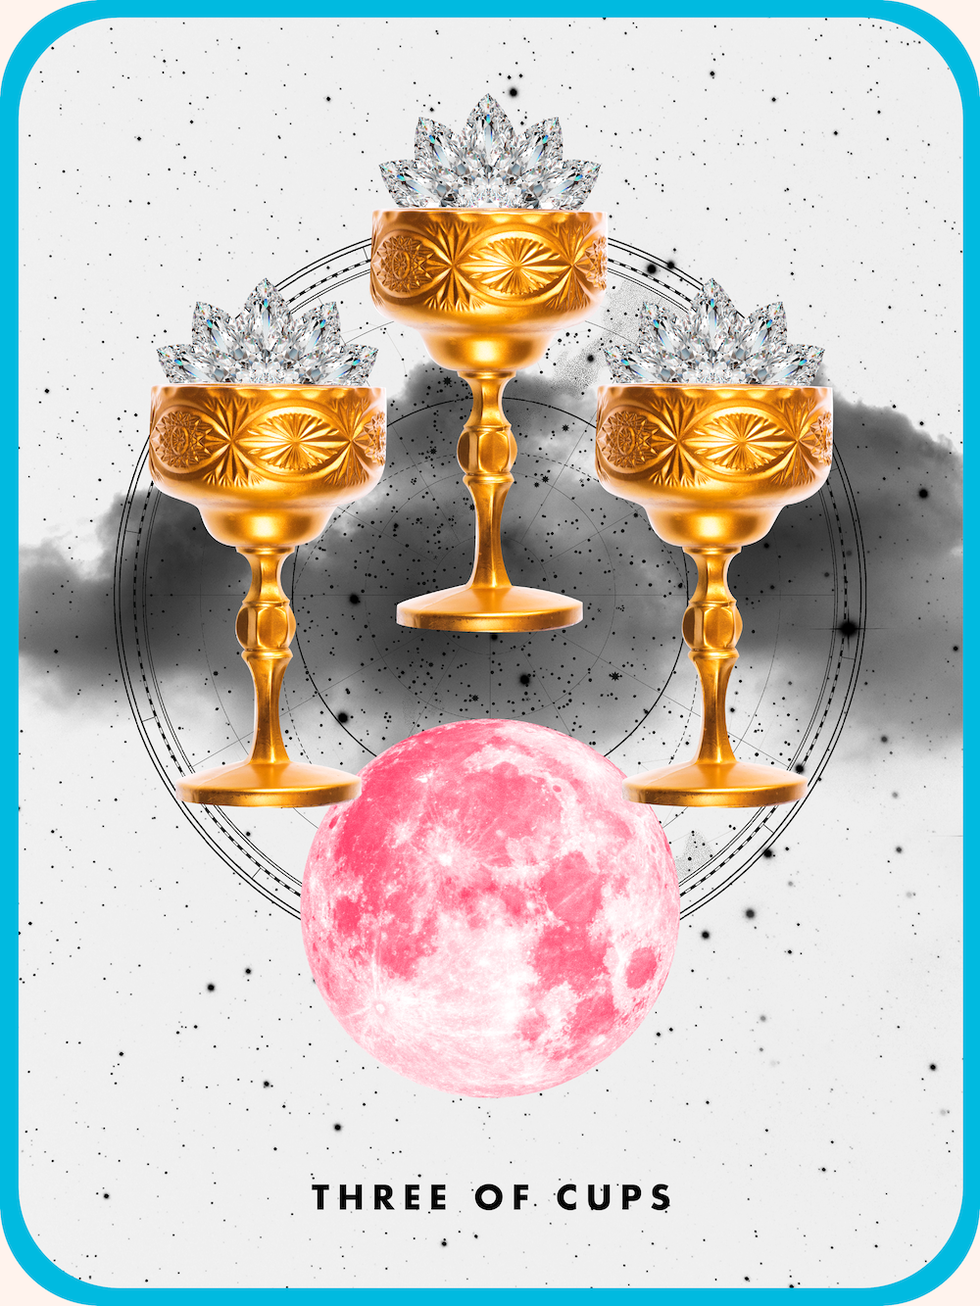 the tarot card the three of cups, showing three golden cups over a full moon